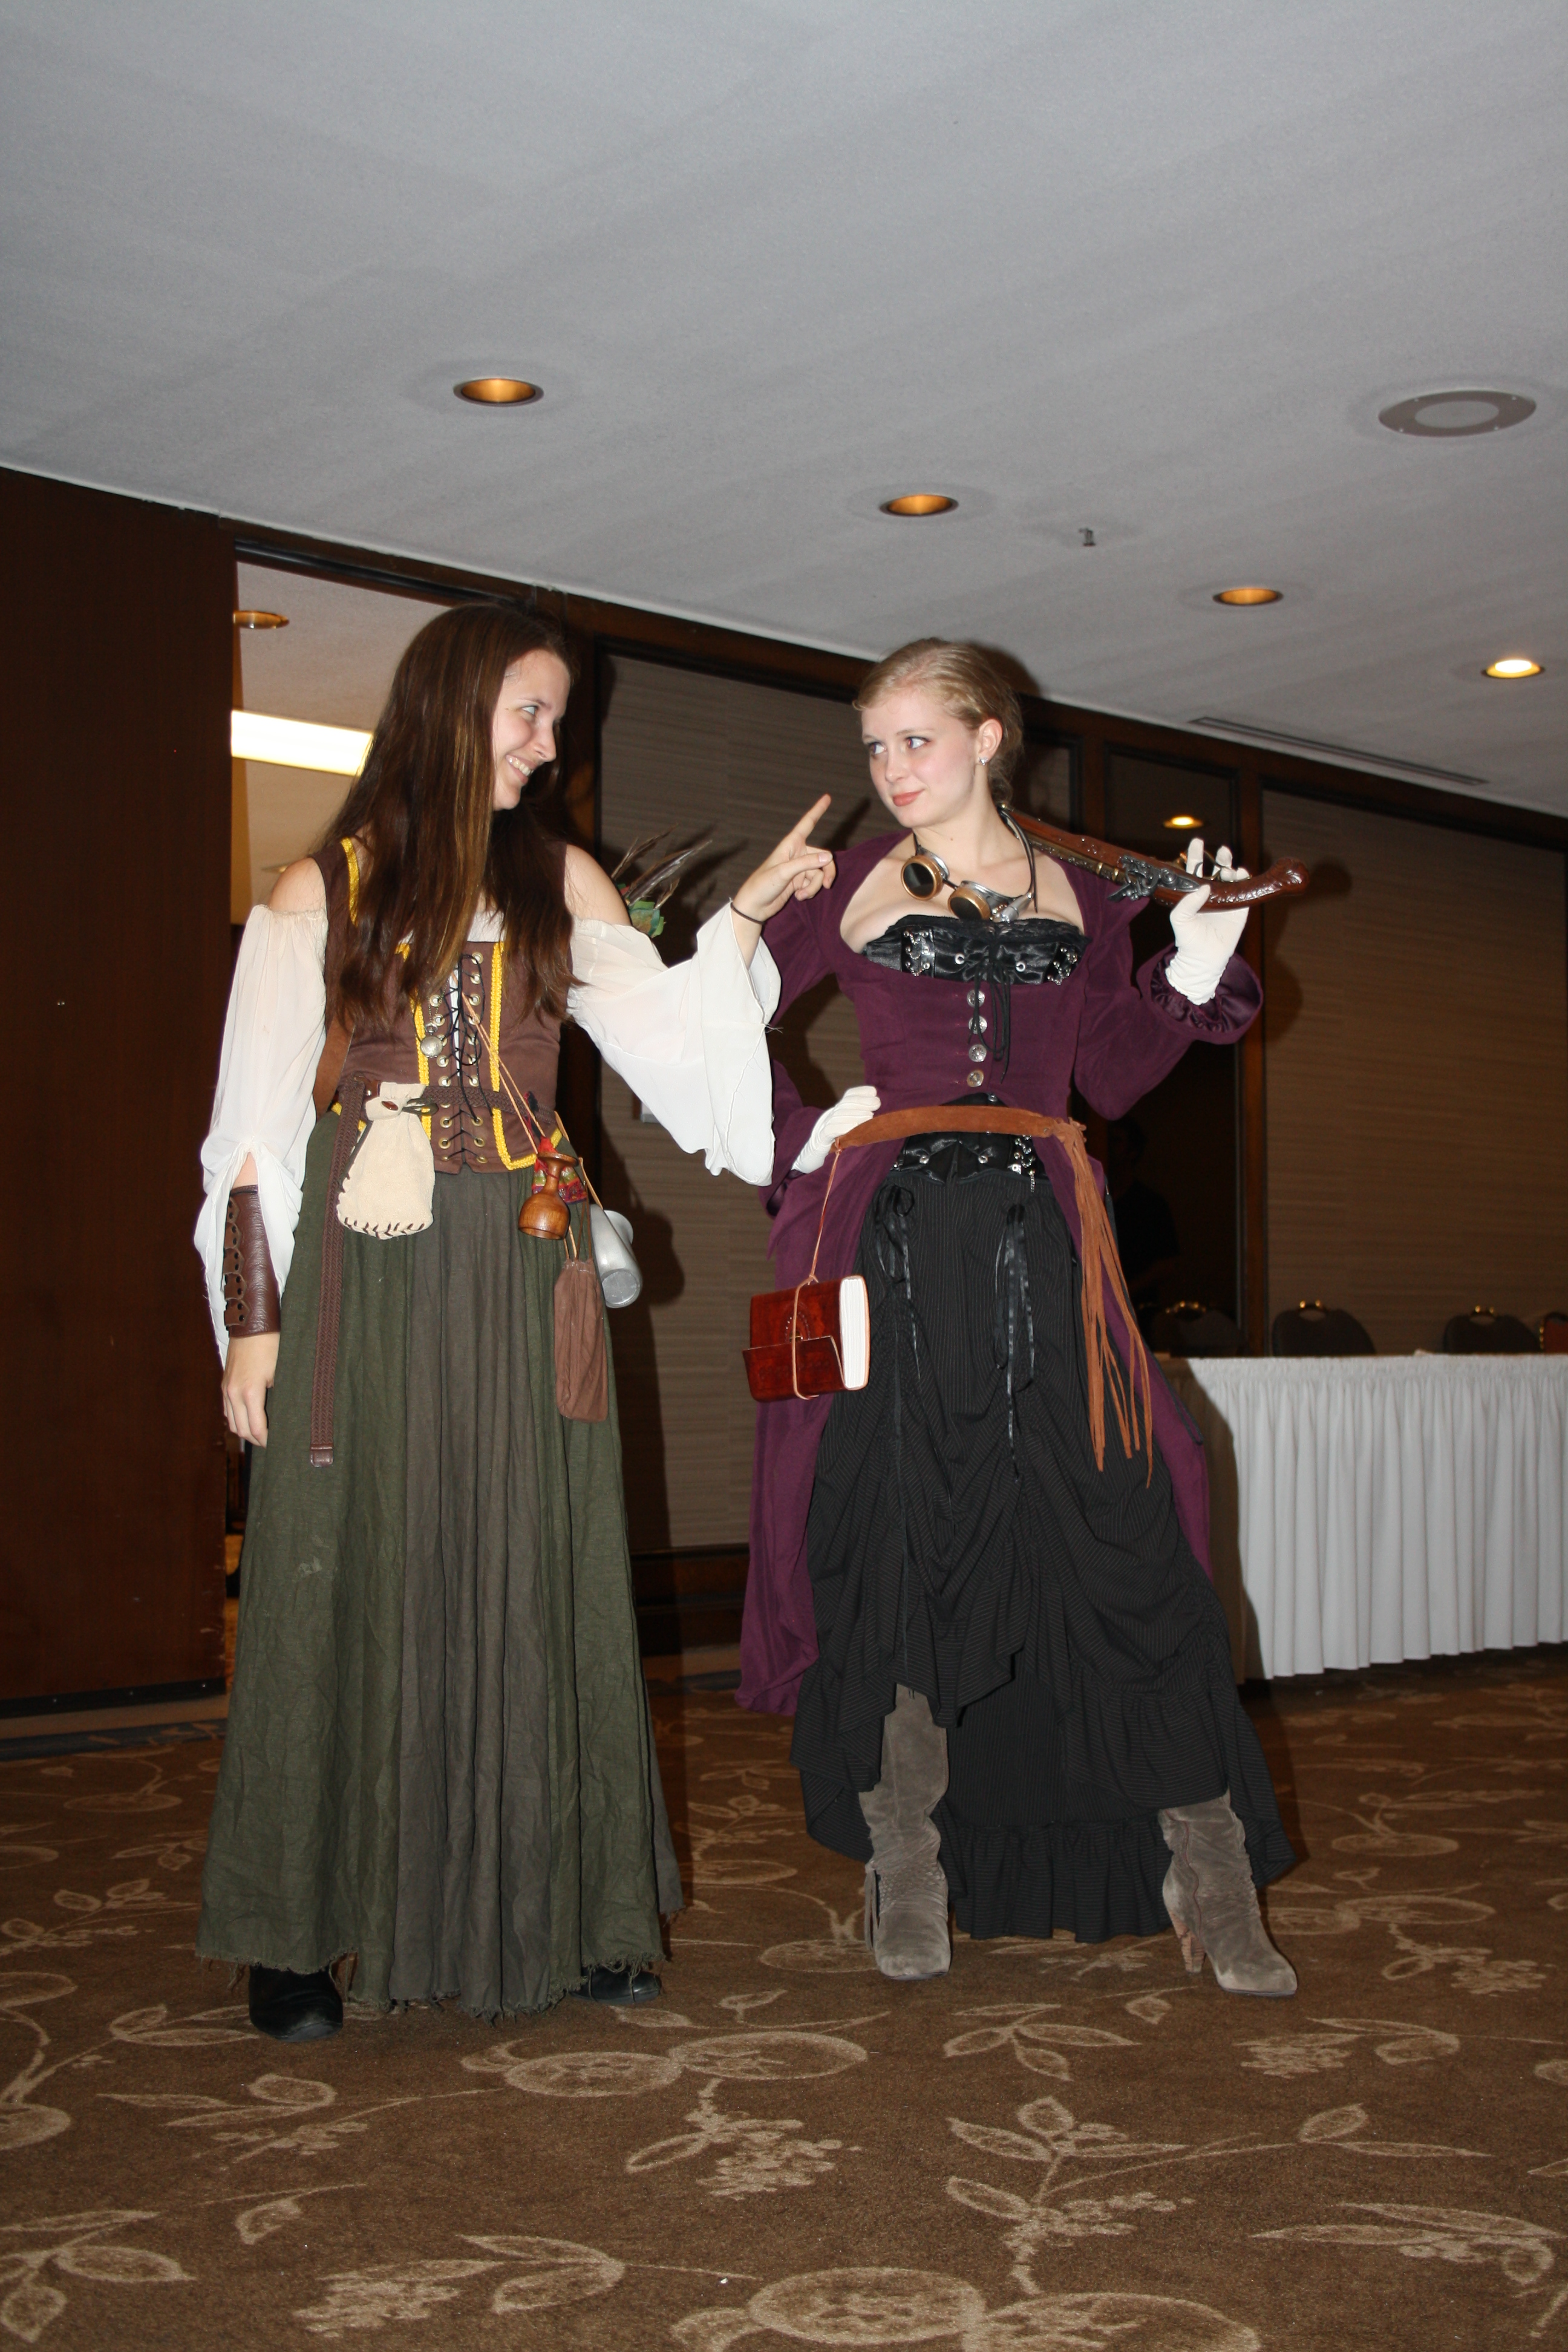 Hanna and Melissa can really entertain, We have to go to the B.C. Renaissance Festival in Langley next year!